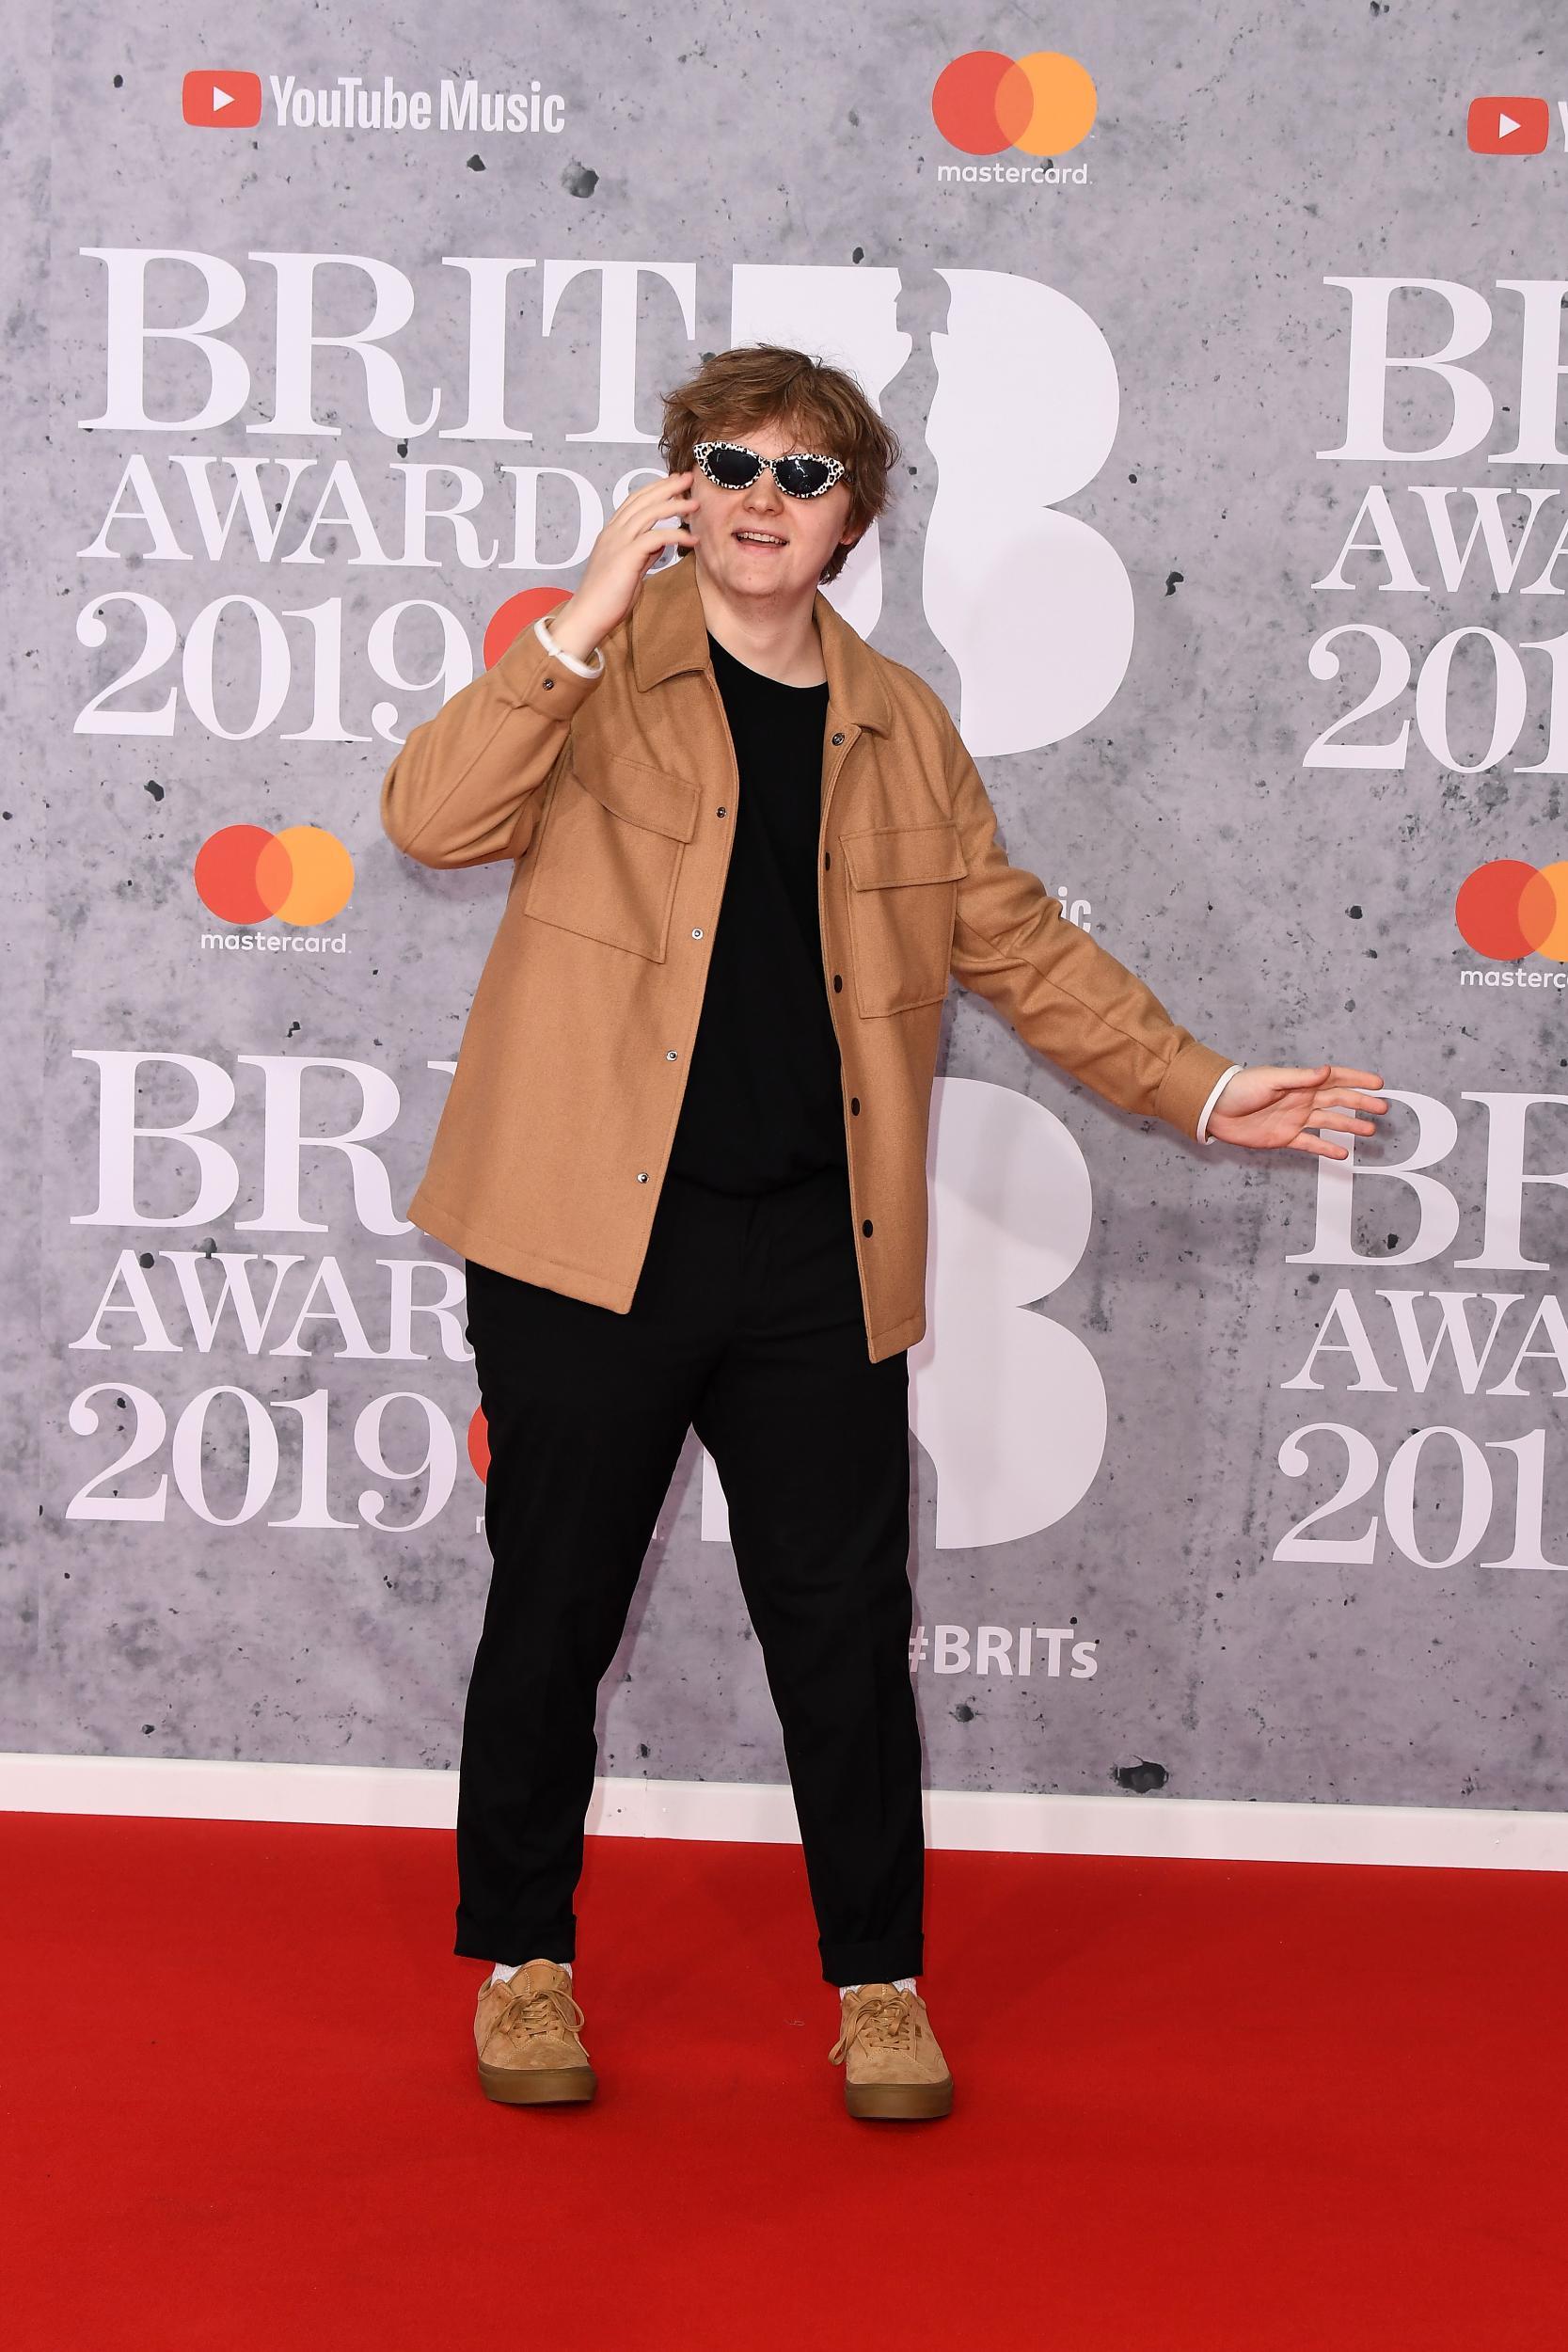 Lewis Capaldi's new album is the fastest selling debut of 2019 so